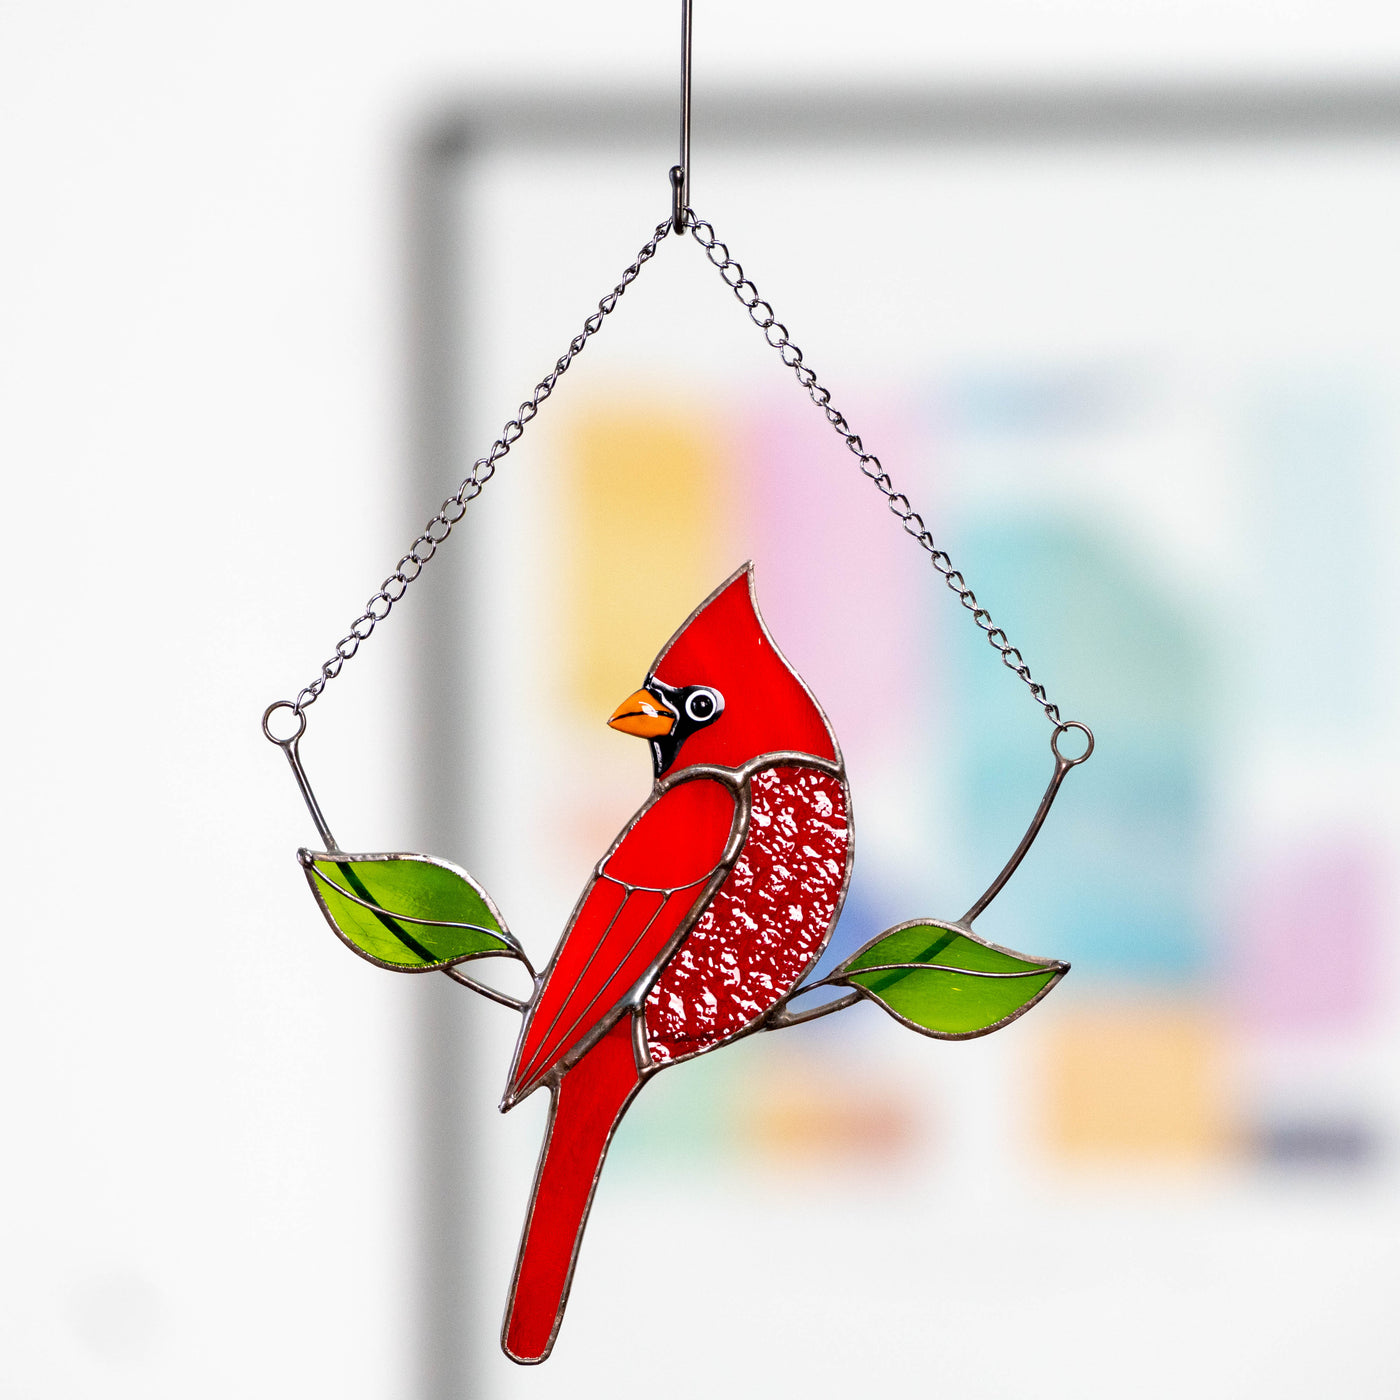 Red winter bird male suncatcher of stained glass